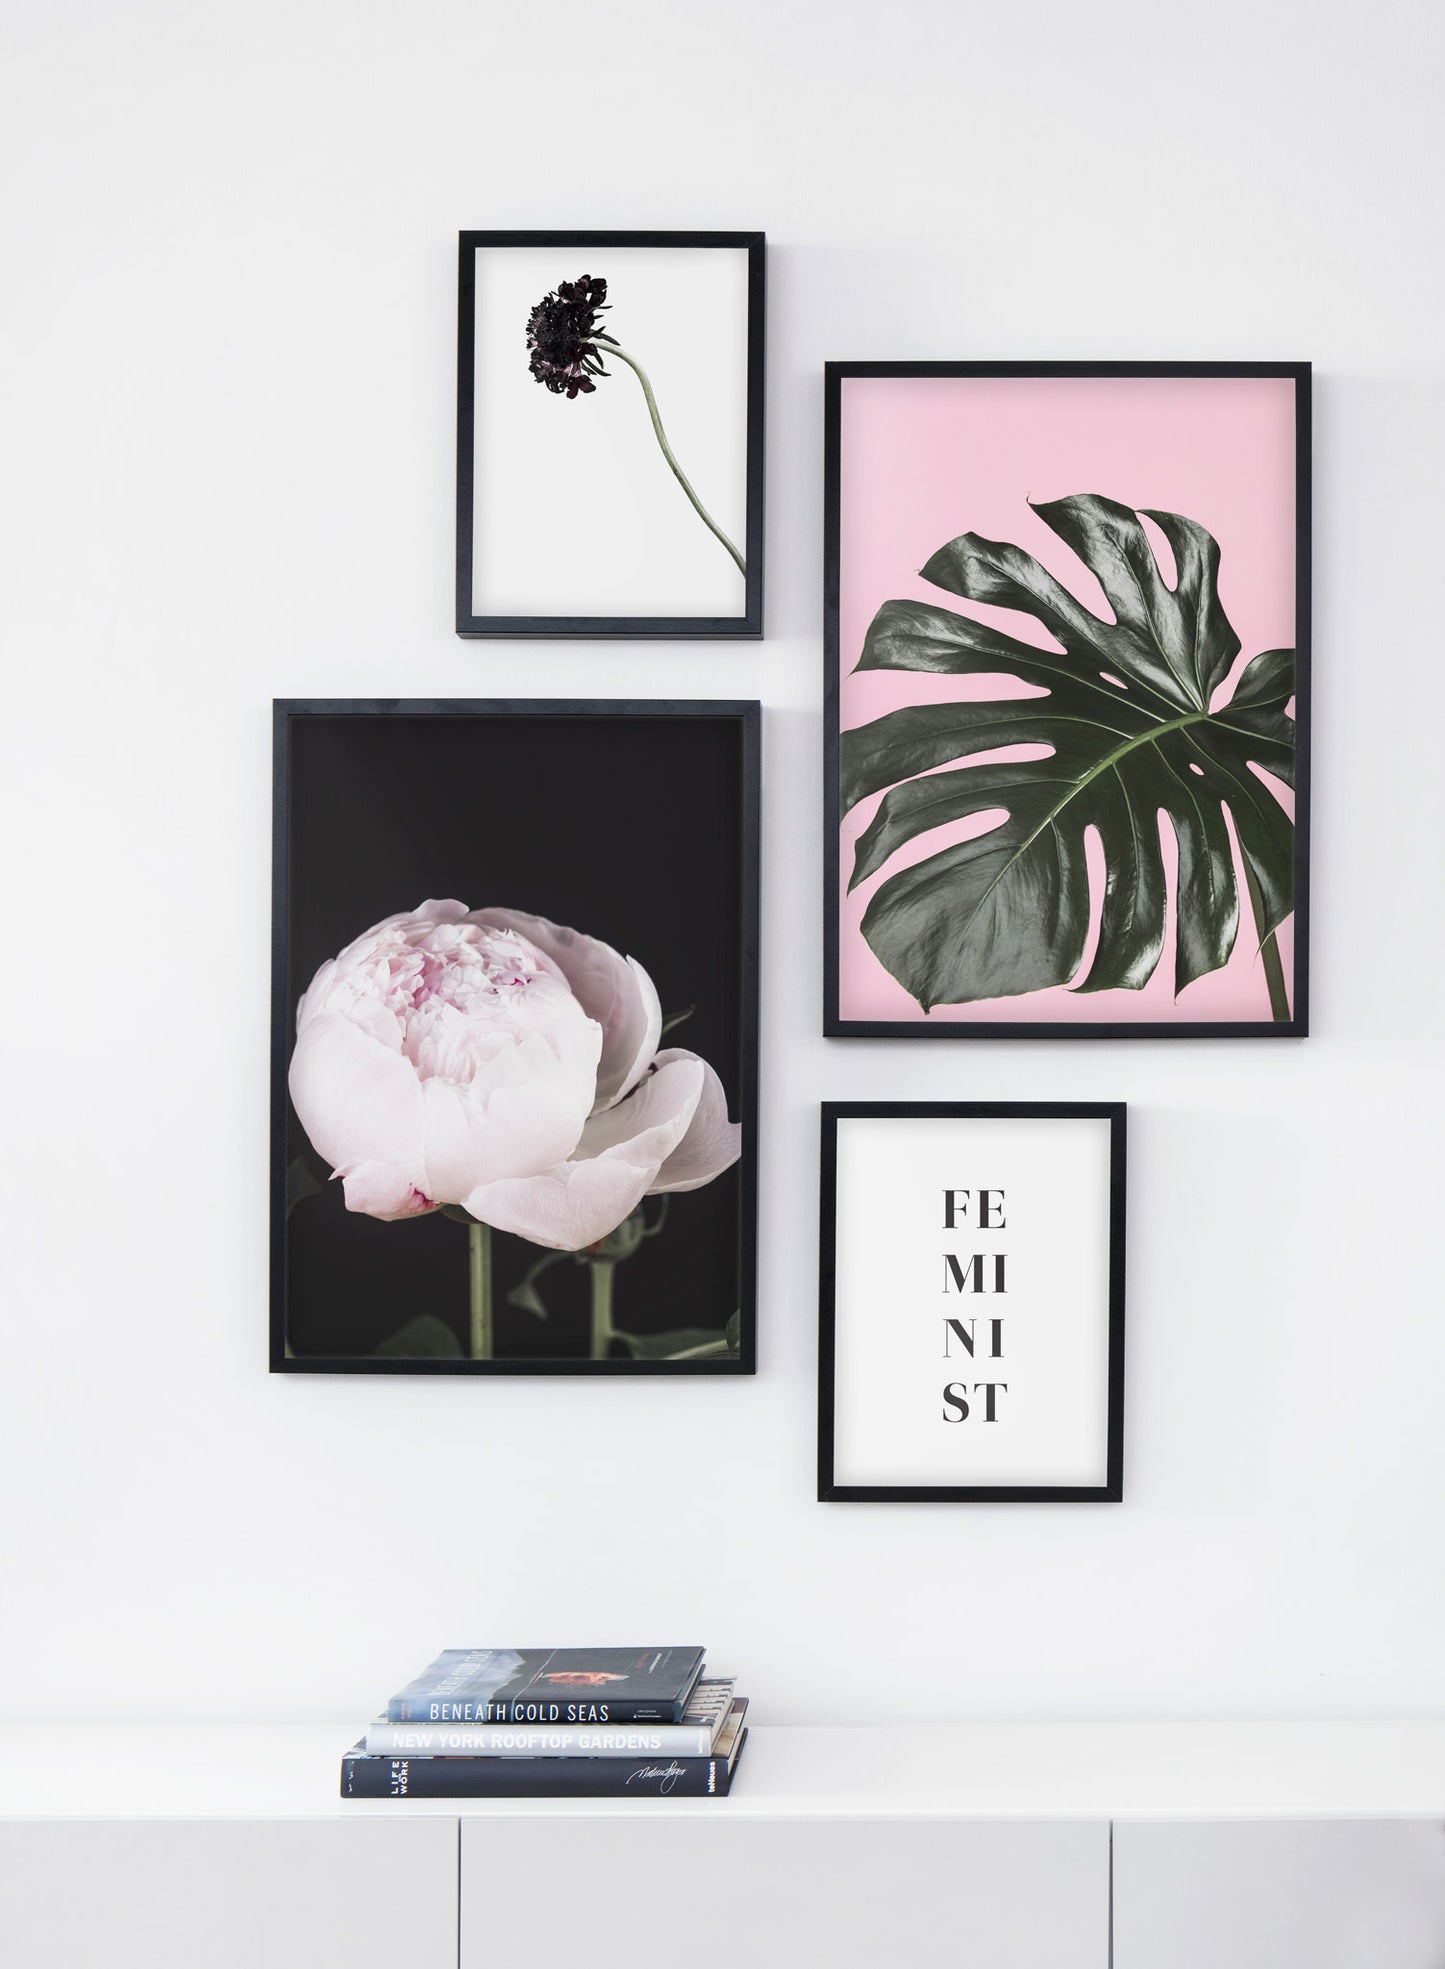 Scandinavian photography poster by Opposite Wall with Black Romance - Living room bookshelf